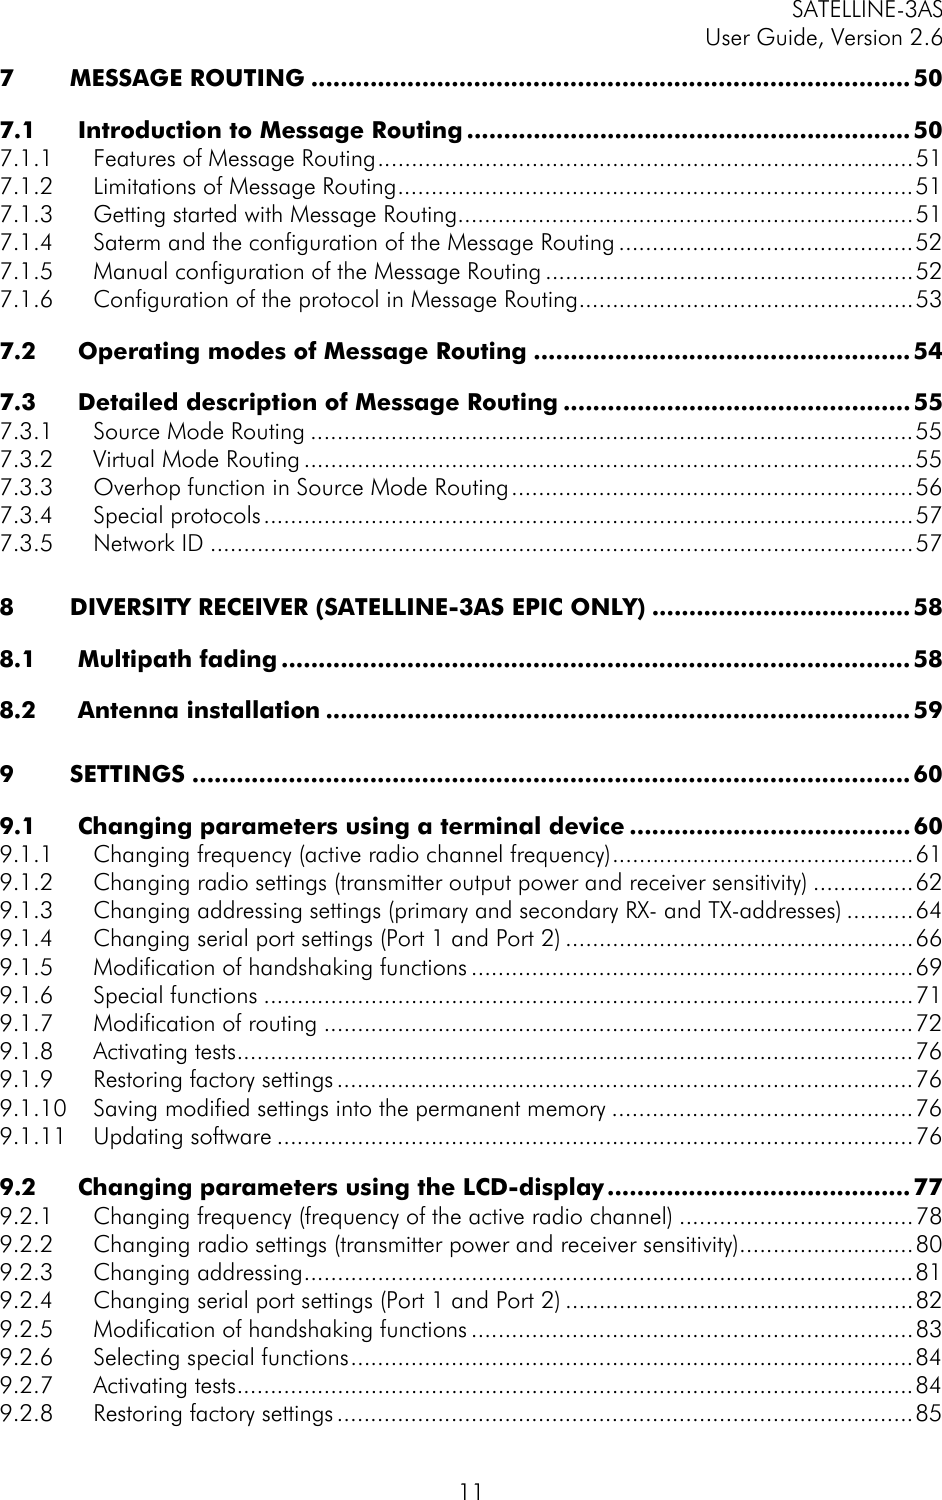 SATELLINE-3AS User Guide, Version 2.6   117 MESSAGE ROUTING ................................................................................. 50 7.1 Introduction to Message Routing ............................................................ 50 7.1.1 Features of Message Routing................................................................................51 7.1.2 Limitations of Message Routing.............................................................................51 7.1.3 Getting started with Message Routing....................................................................51 7.1.4 Saterm and the configuration of the Message Routing ............................................52 7.1.5 Manual configuration of the Message Routing .......................................................52 7.1.6 Configuration of the protocol in Message Routing..................................................53 7.2 Operating modes of Message Routing ................................................... 54 7.3 Detailed description of Message Routing ...............................................55 7.3.1 Source Mode Routing ..........................................................................................55 7.3.2 Virtual Mode Routing ...........................................................................................55 7.3.3 Overhop function in Source Mode Routing............................................................56 7.3.4 Special protocols.................................................................................................57 7.3.5 Network ID .........................................................................................................57 8 DIVERSITY RECEIVER (SATELLINE-3AS EPIC ONLY) ................................... 58 8.1 Multipath fading .....................................................................................58 8.2 Antenna installation ............................................................................... 59 9 SETTINGS .................................................................................................60 9.1 Changing parameters using a terminal device ...................................... 60 9.1.1 Changing frequency (active radio channel frequency).............................................61 9.1.2 Changing radio settings (transmitter output power and receiver sensitivity) ...............62 9.1.3 Changing addressing settings (primary and secondary RX- and TX-addresses) ..........64 9.1.4 Changing serial port settings (Port 1 and Port 2) ....................................................66 9.1.5 Modification of handshaking functions ..................................................................69 9.1.6 Special functions .................................................................................................71 9.1.7 Modification of routing ........................................................................................72 9.1.8 Activating tests.....................................................................................................76 9.1.9 Restoring factory settings ......................................................................................76 9.1.10 Saving modified settings into the permanent memory .............................................76 9.1.11 Updating software ...............................................................................................76 9.2 Changing parameters using the LCD-display......................................... 77 9.2.1 Changing frequency (frequency of the active radio channel) ...................................78 9.2.2 Changing radio settings (transmitter power and receiver sensitivity)..........................80 9.2.3 Changing addressing...........................................................................................81 9.2.4 Changing serial port settings (Port 1 and Port 2) ....................................................82 9.2.5 Modification of handshaking functions ..................................................................83 9.2.6 Selecting special functions....................................................................................84 9.2.7 Activating tests.....................................................................................................84 9.2.8 Restoring factory settings ......................................................................................85 